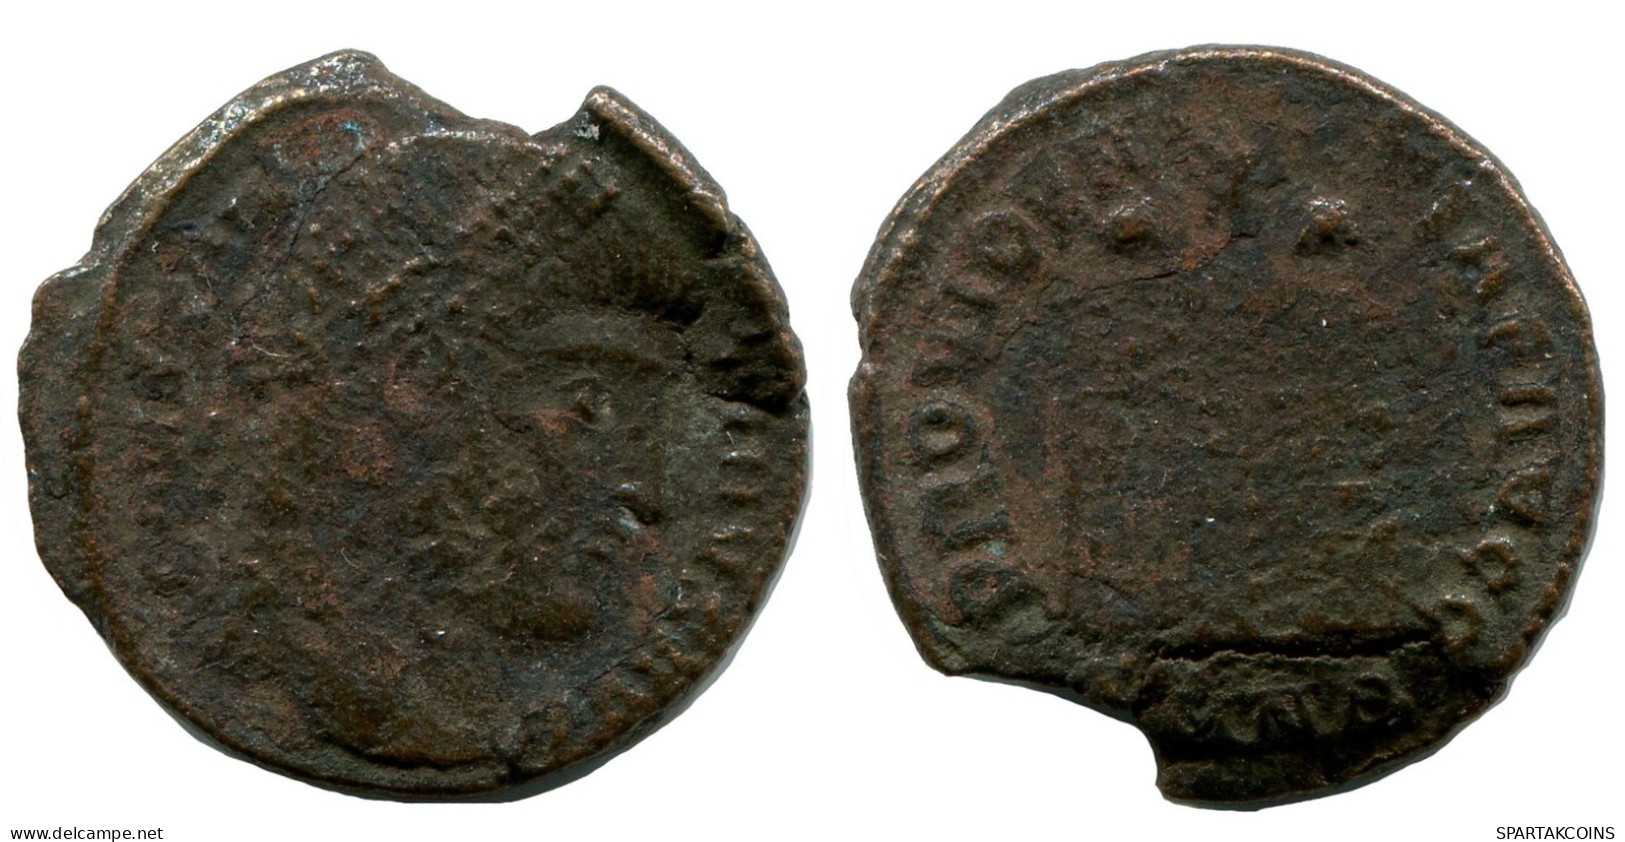 CONSTANTINE I MINTED IN NICOMEDIA FOUND IN IHNASYAH HOARD EGYPT #ANC10921.14.E.A - The Christian Empire (307 AD To 363 AD)